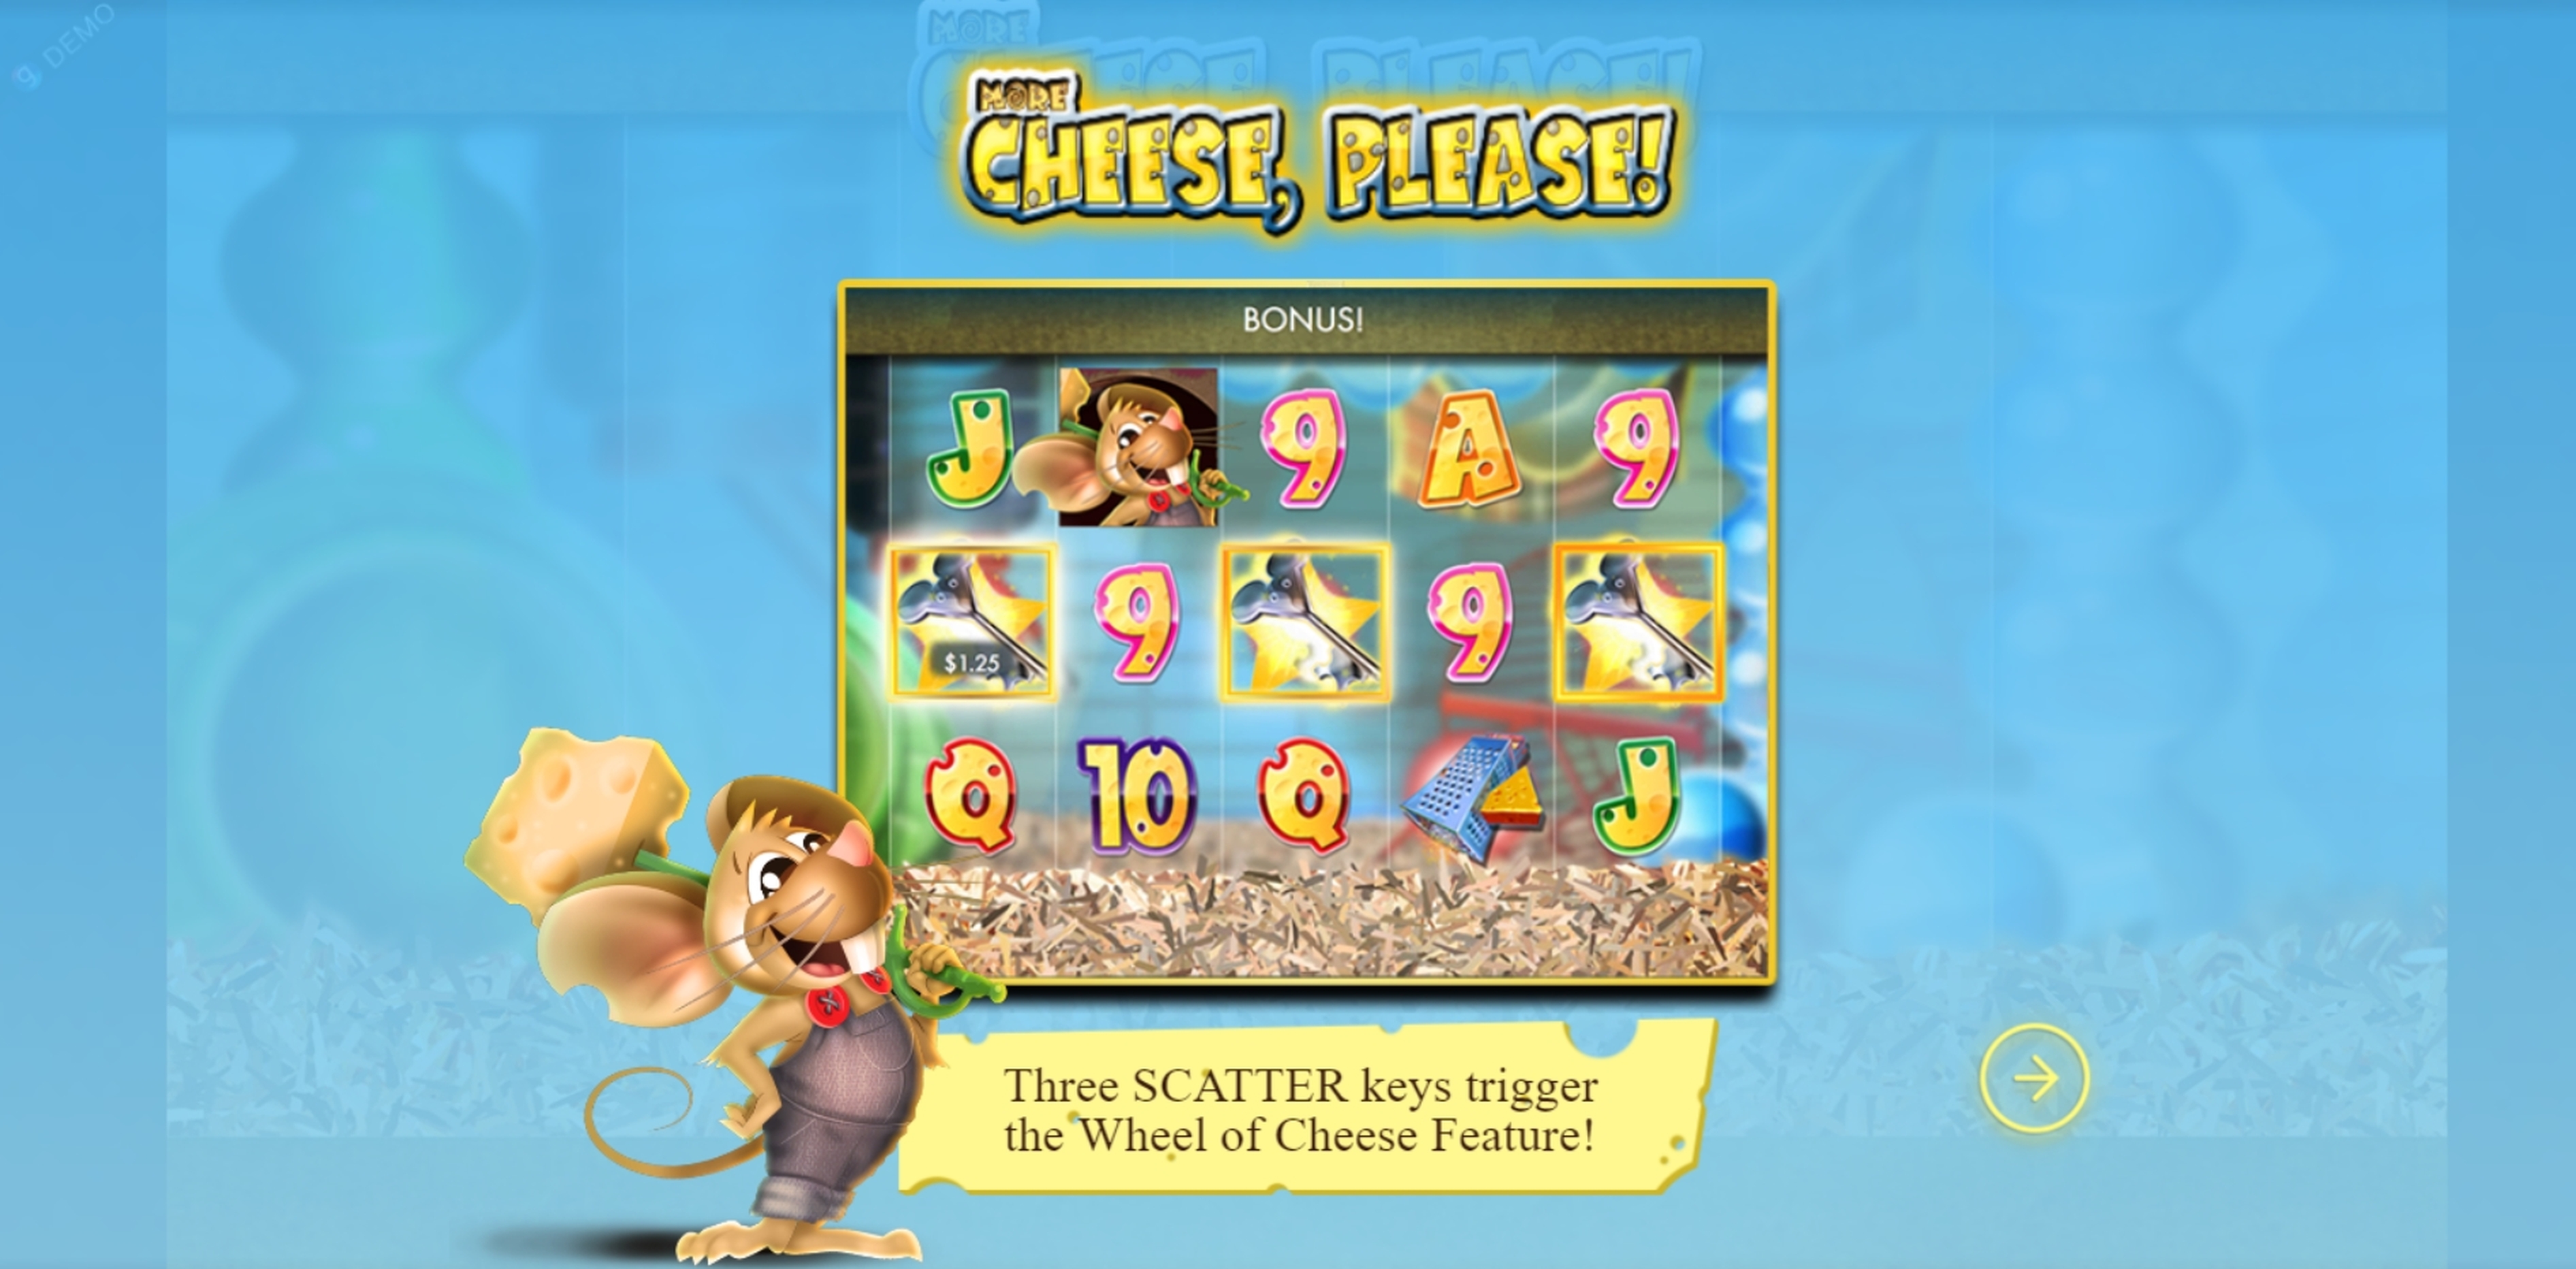 Play More Cheese Please Free Casino Slot Game by Genesis Gaming